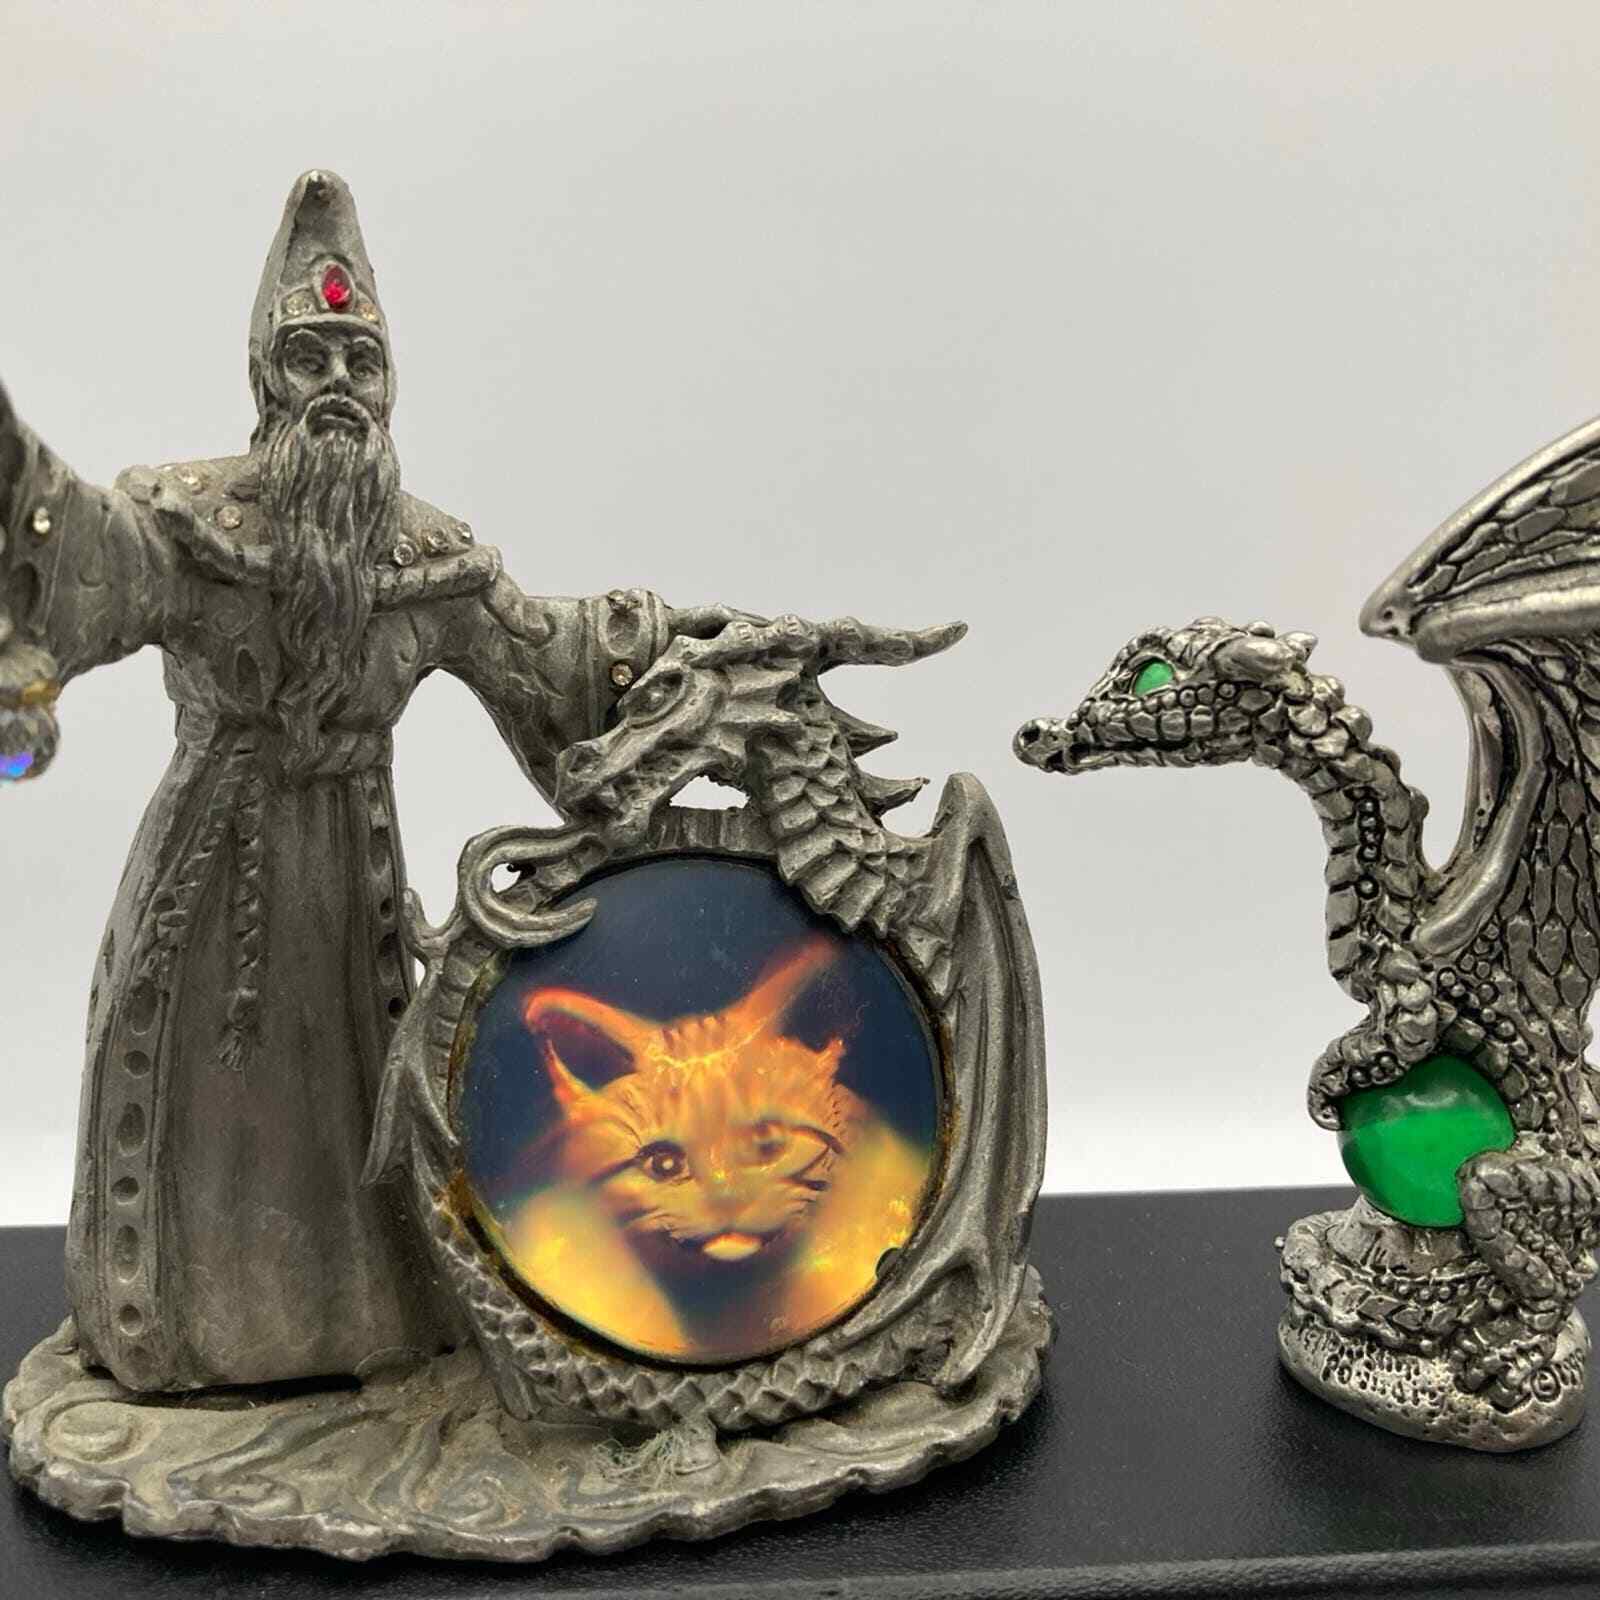 Sunglo Pewter Wizard with Hologram Cat 94- Nice Detailed Pewter Dragon from 99